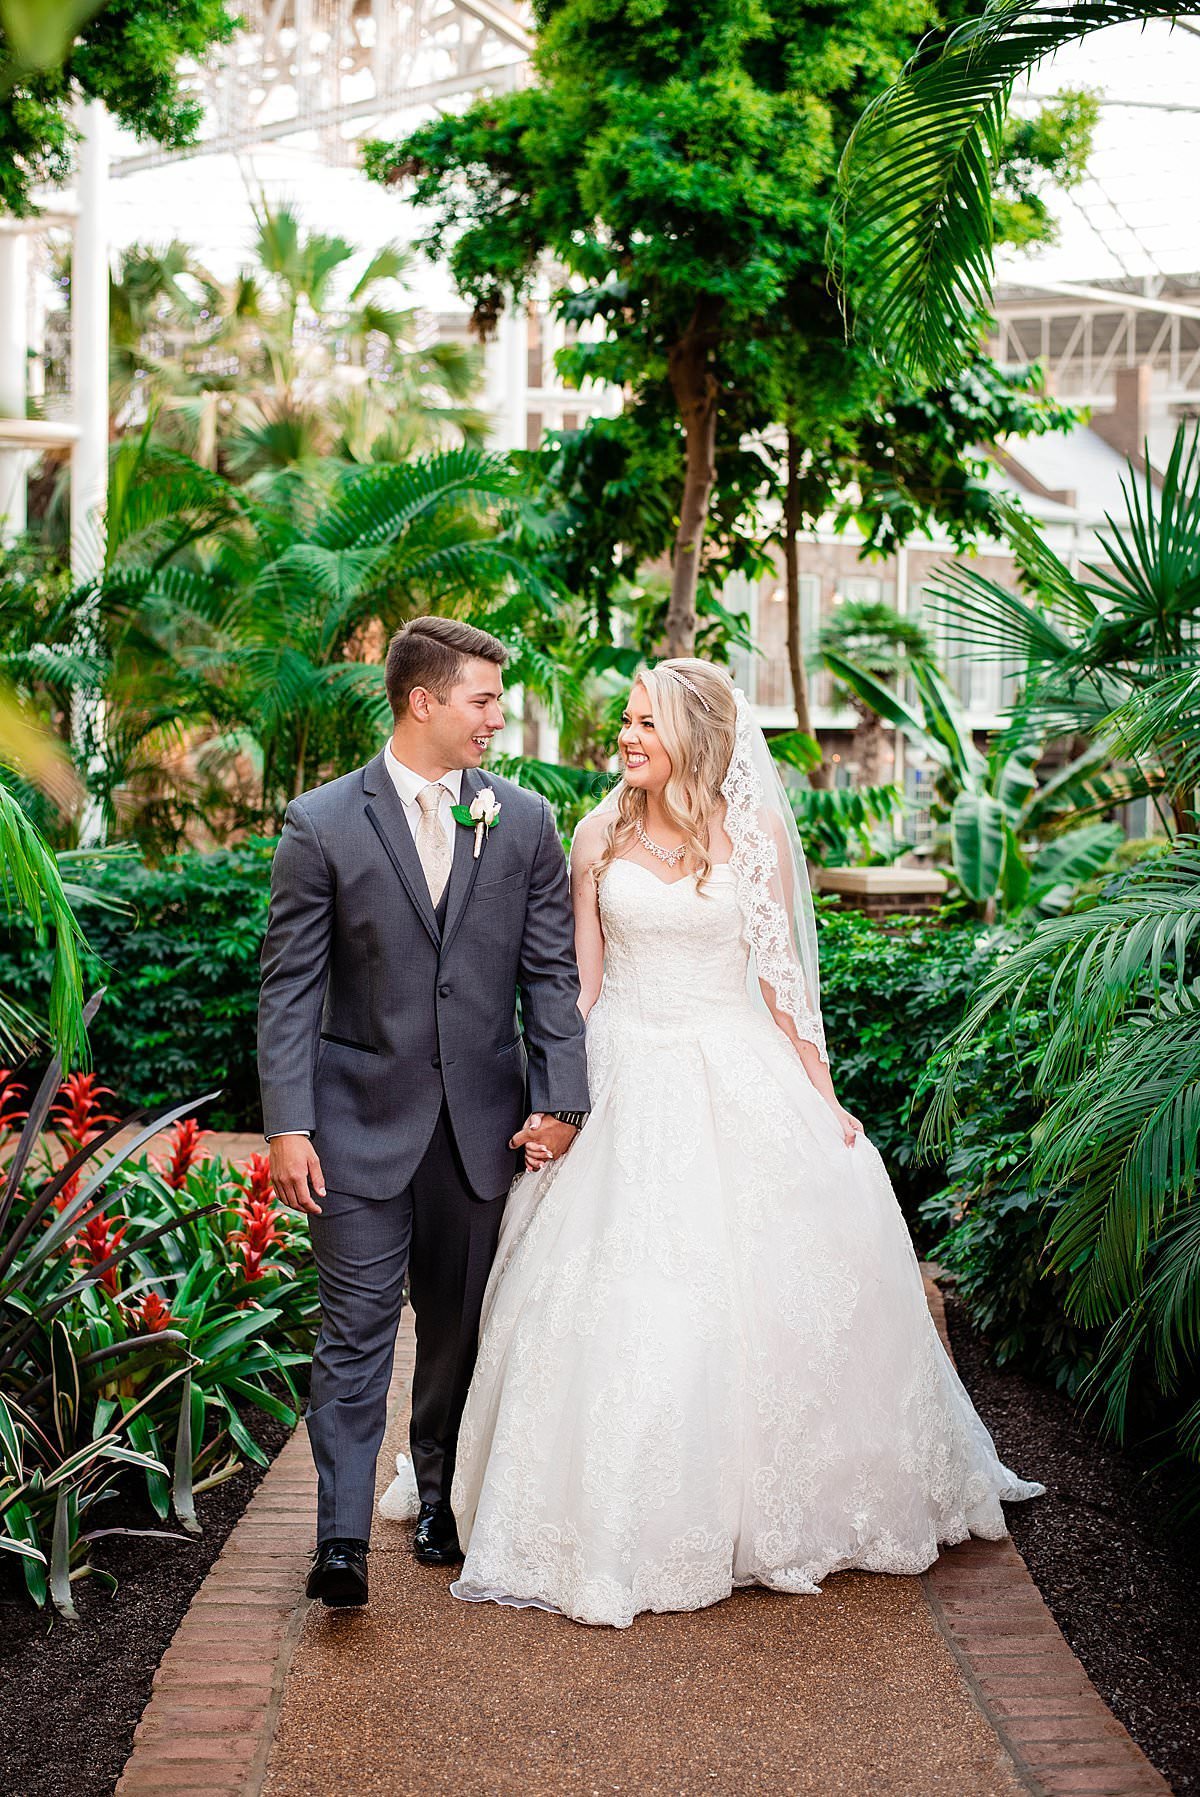 Newlywed couple walking hand in hand with palm trees behind